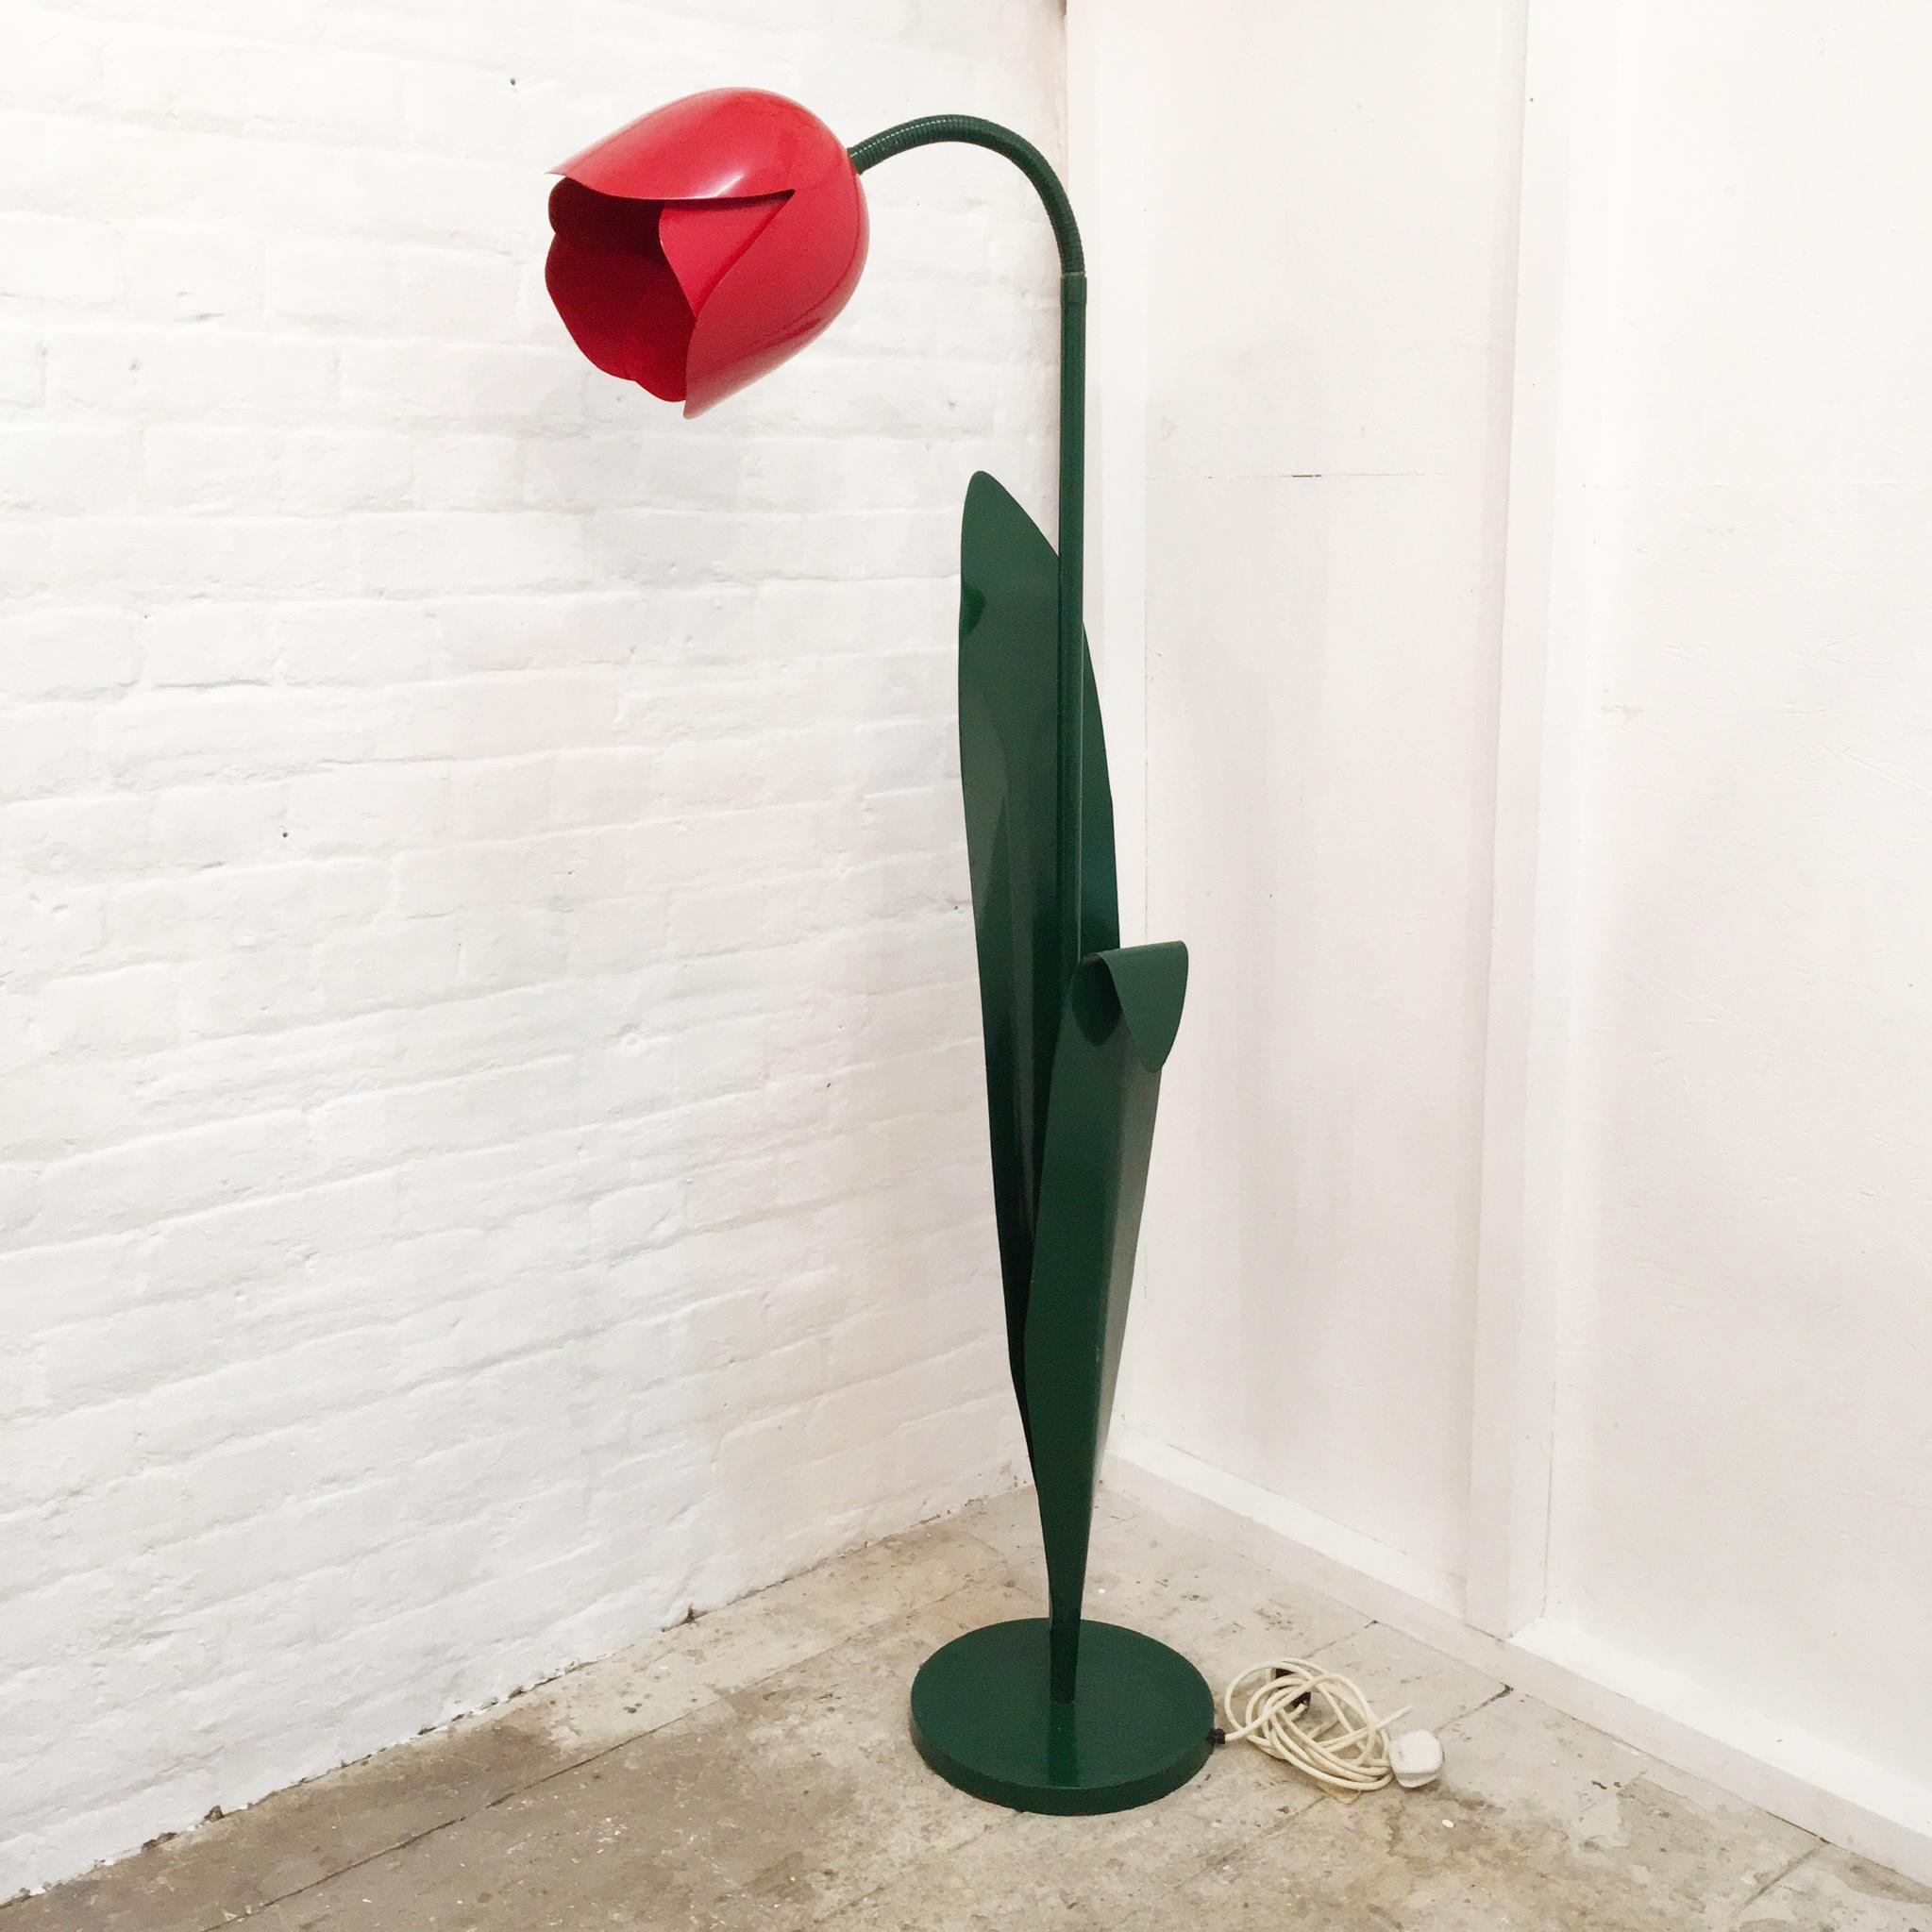 1980s Red Tulip Floor Lamp Bliss Uk Bei 1stdibs within measurements 2047 X 2047